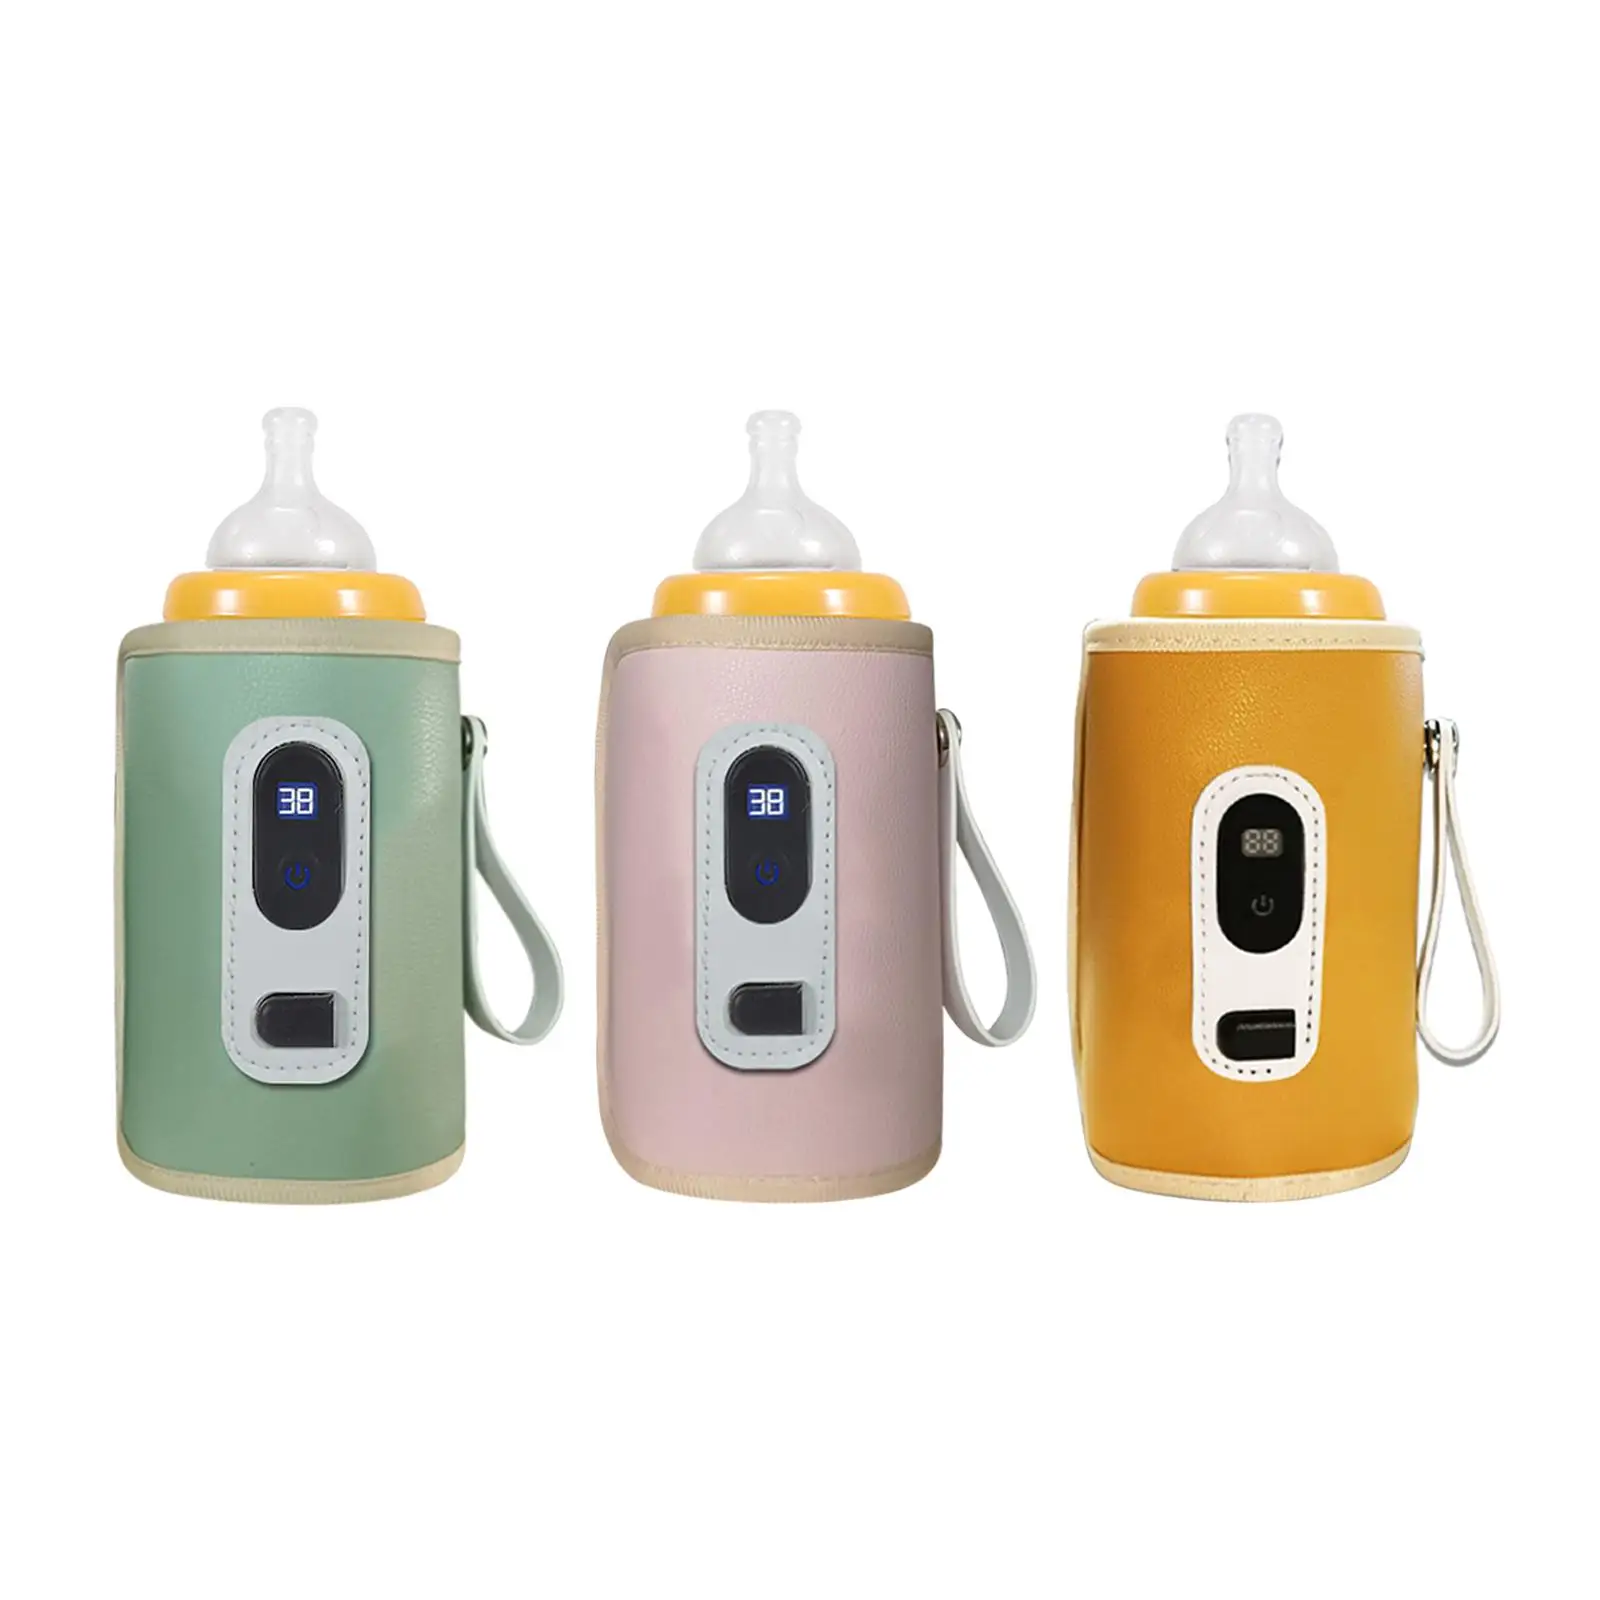 

Milk Heat Keeper Temperature Adjustment USB Constant Temperature Baby Bottle Warmer for Daily Use Camping Travel Nursing Picnic